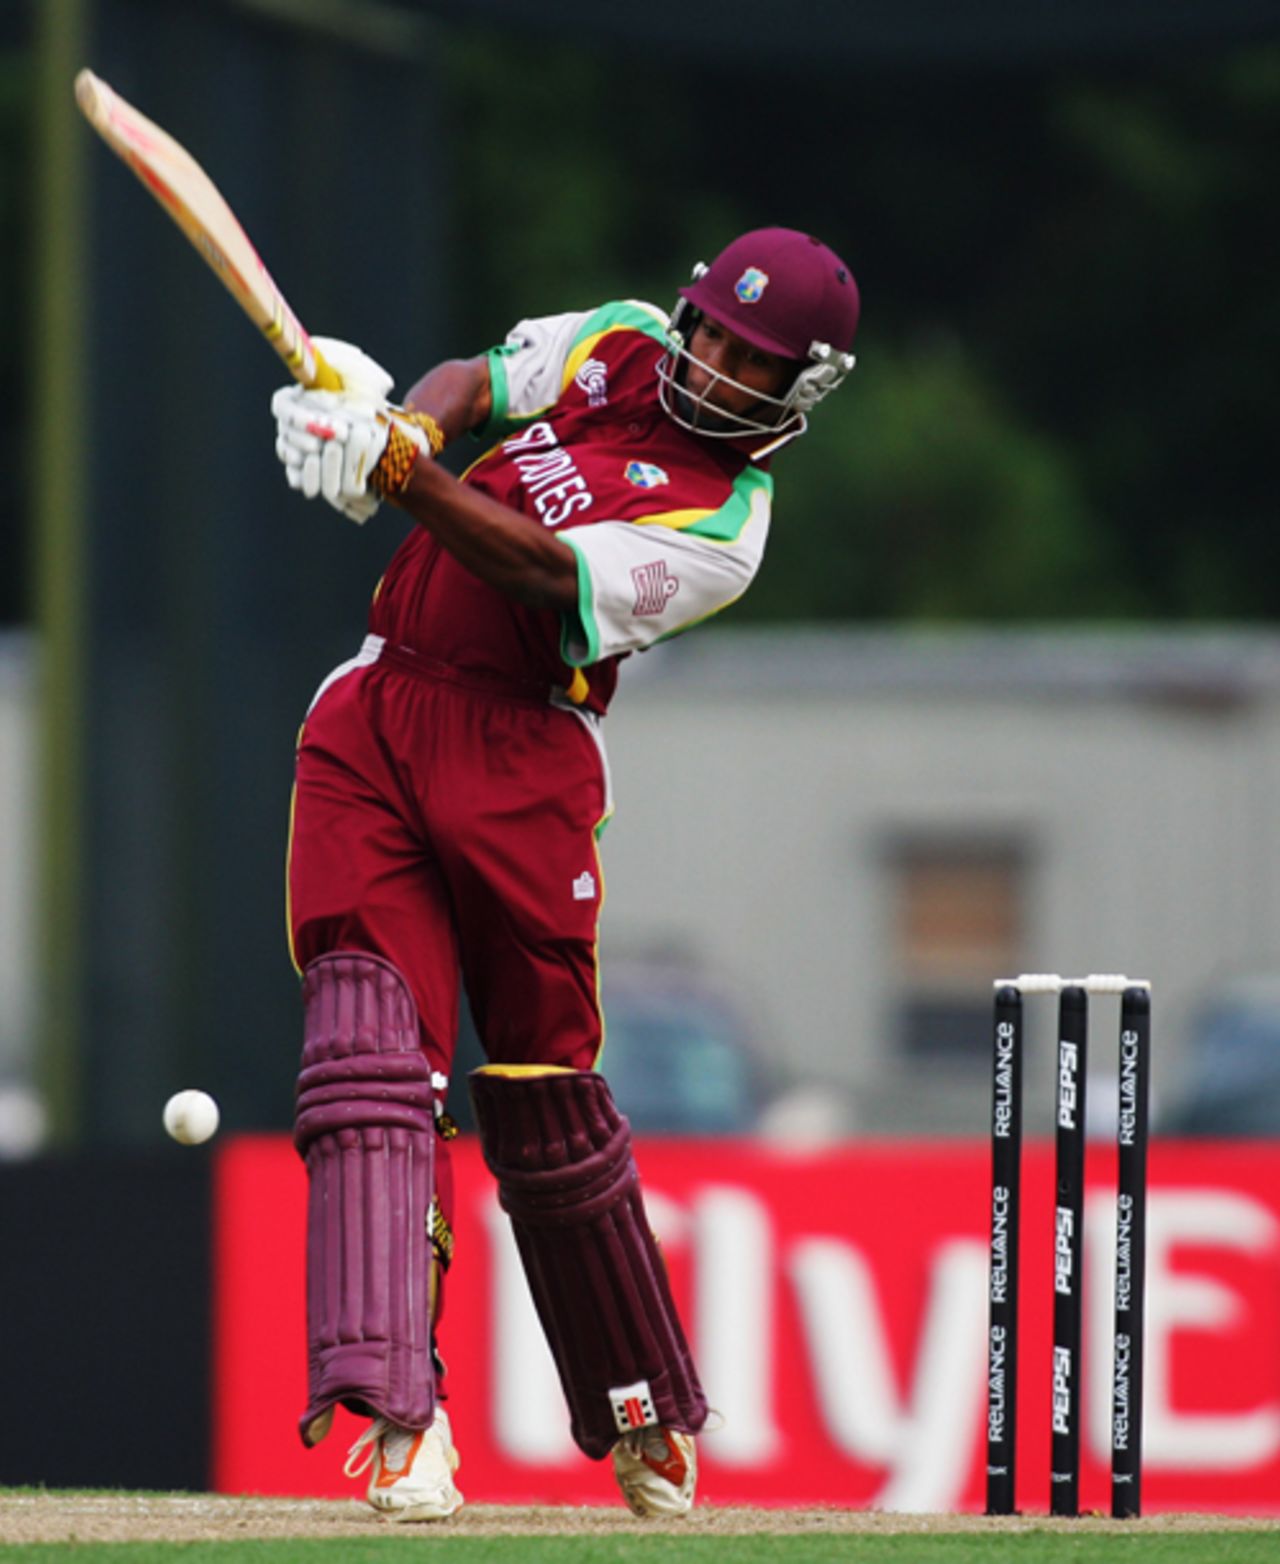 Kieran Powell gave West Indies a breezy start with 53 off 50 balls, South Africa U-19s v West Indies U-19s, Group B, Under-19 World Cup, Kuala Lumpur, February 18, 2008 




